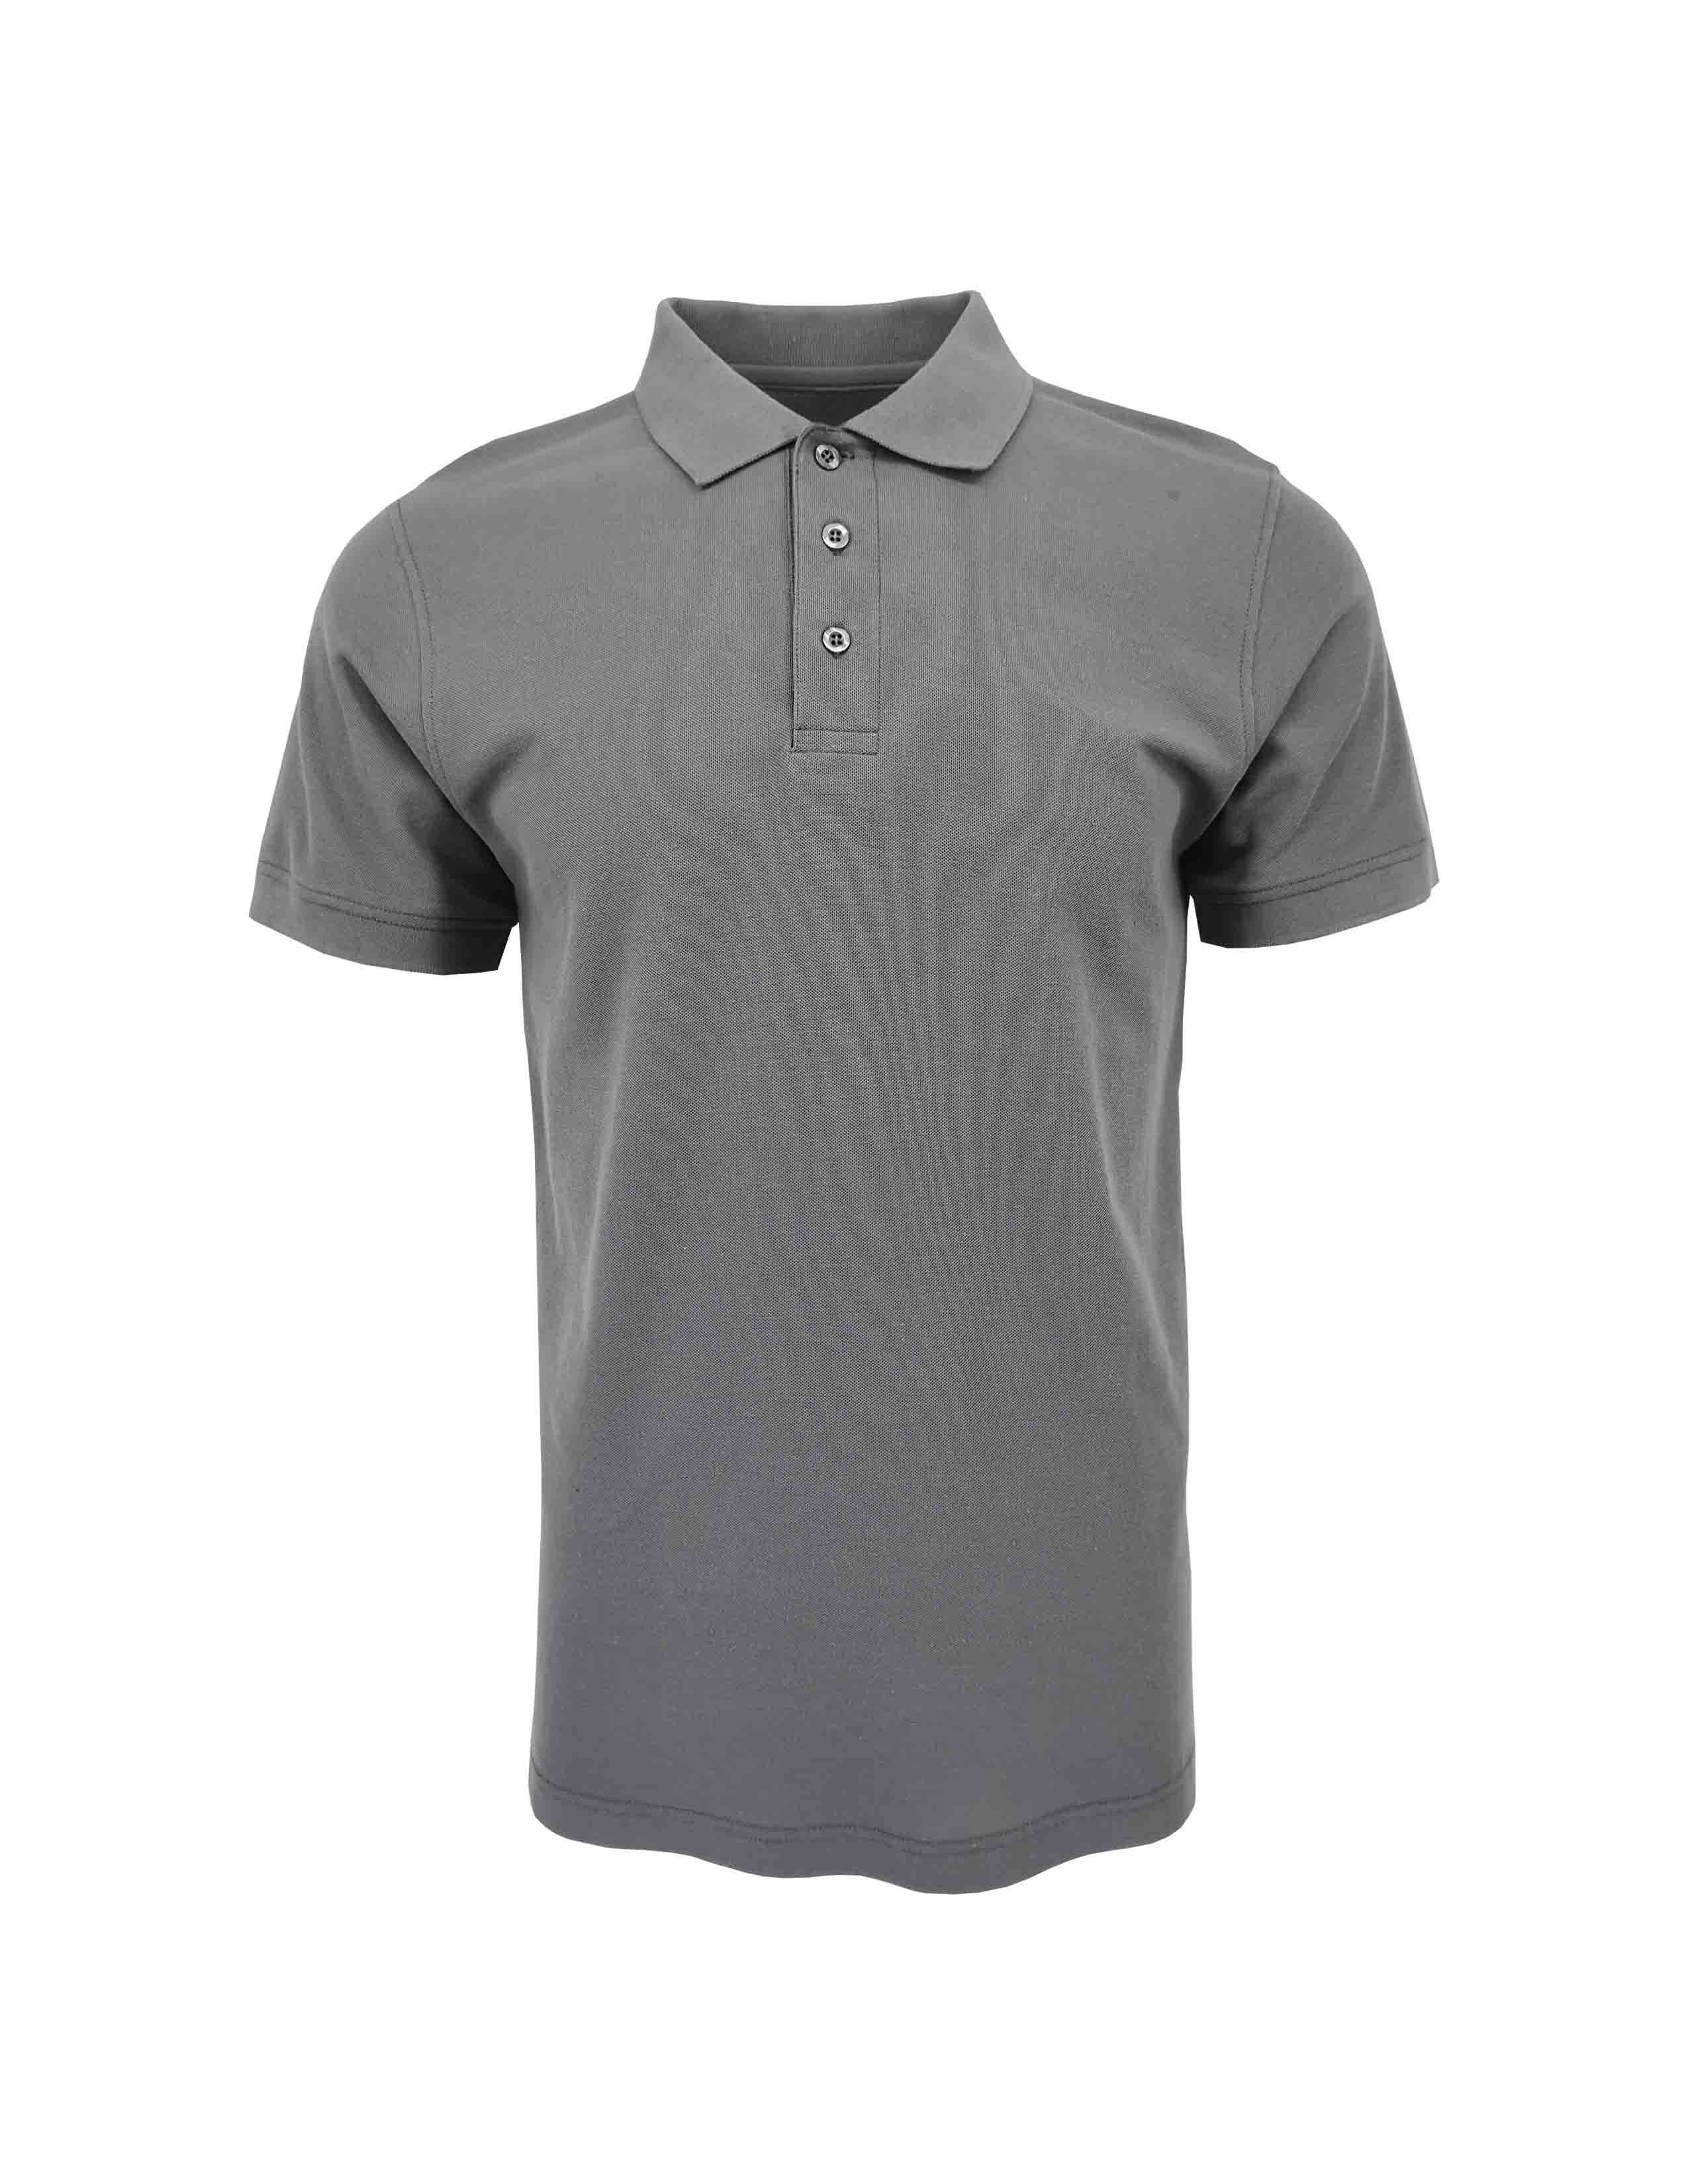 RIGHTWAY New Cotton Blend Polo Small Size 2XS Unisex Plain Cotton Polyester Soft Material Polo Tee CBP70 Full Color Available